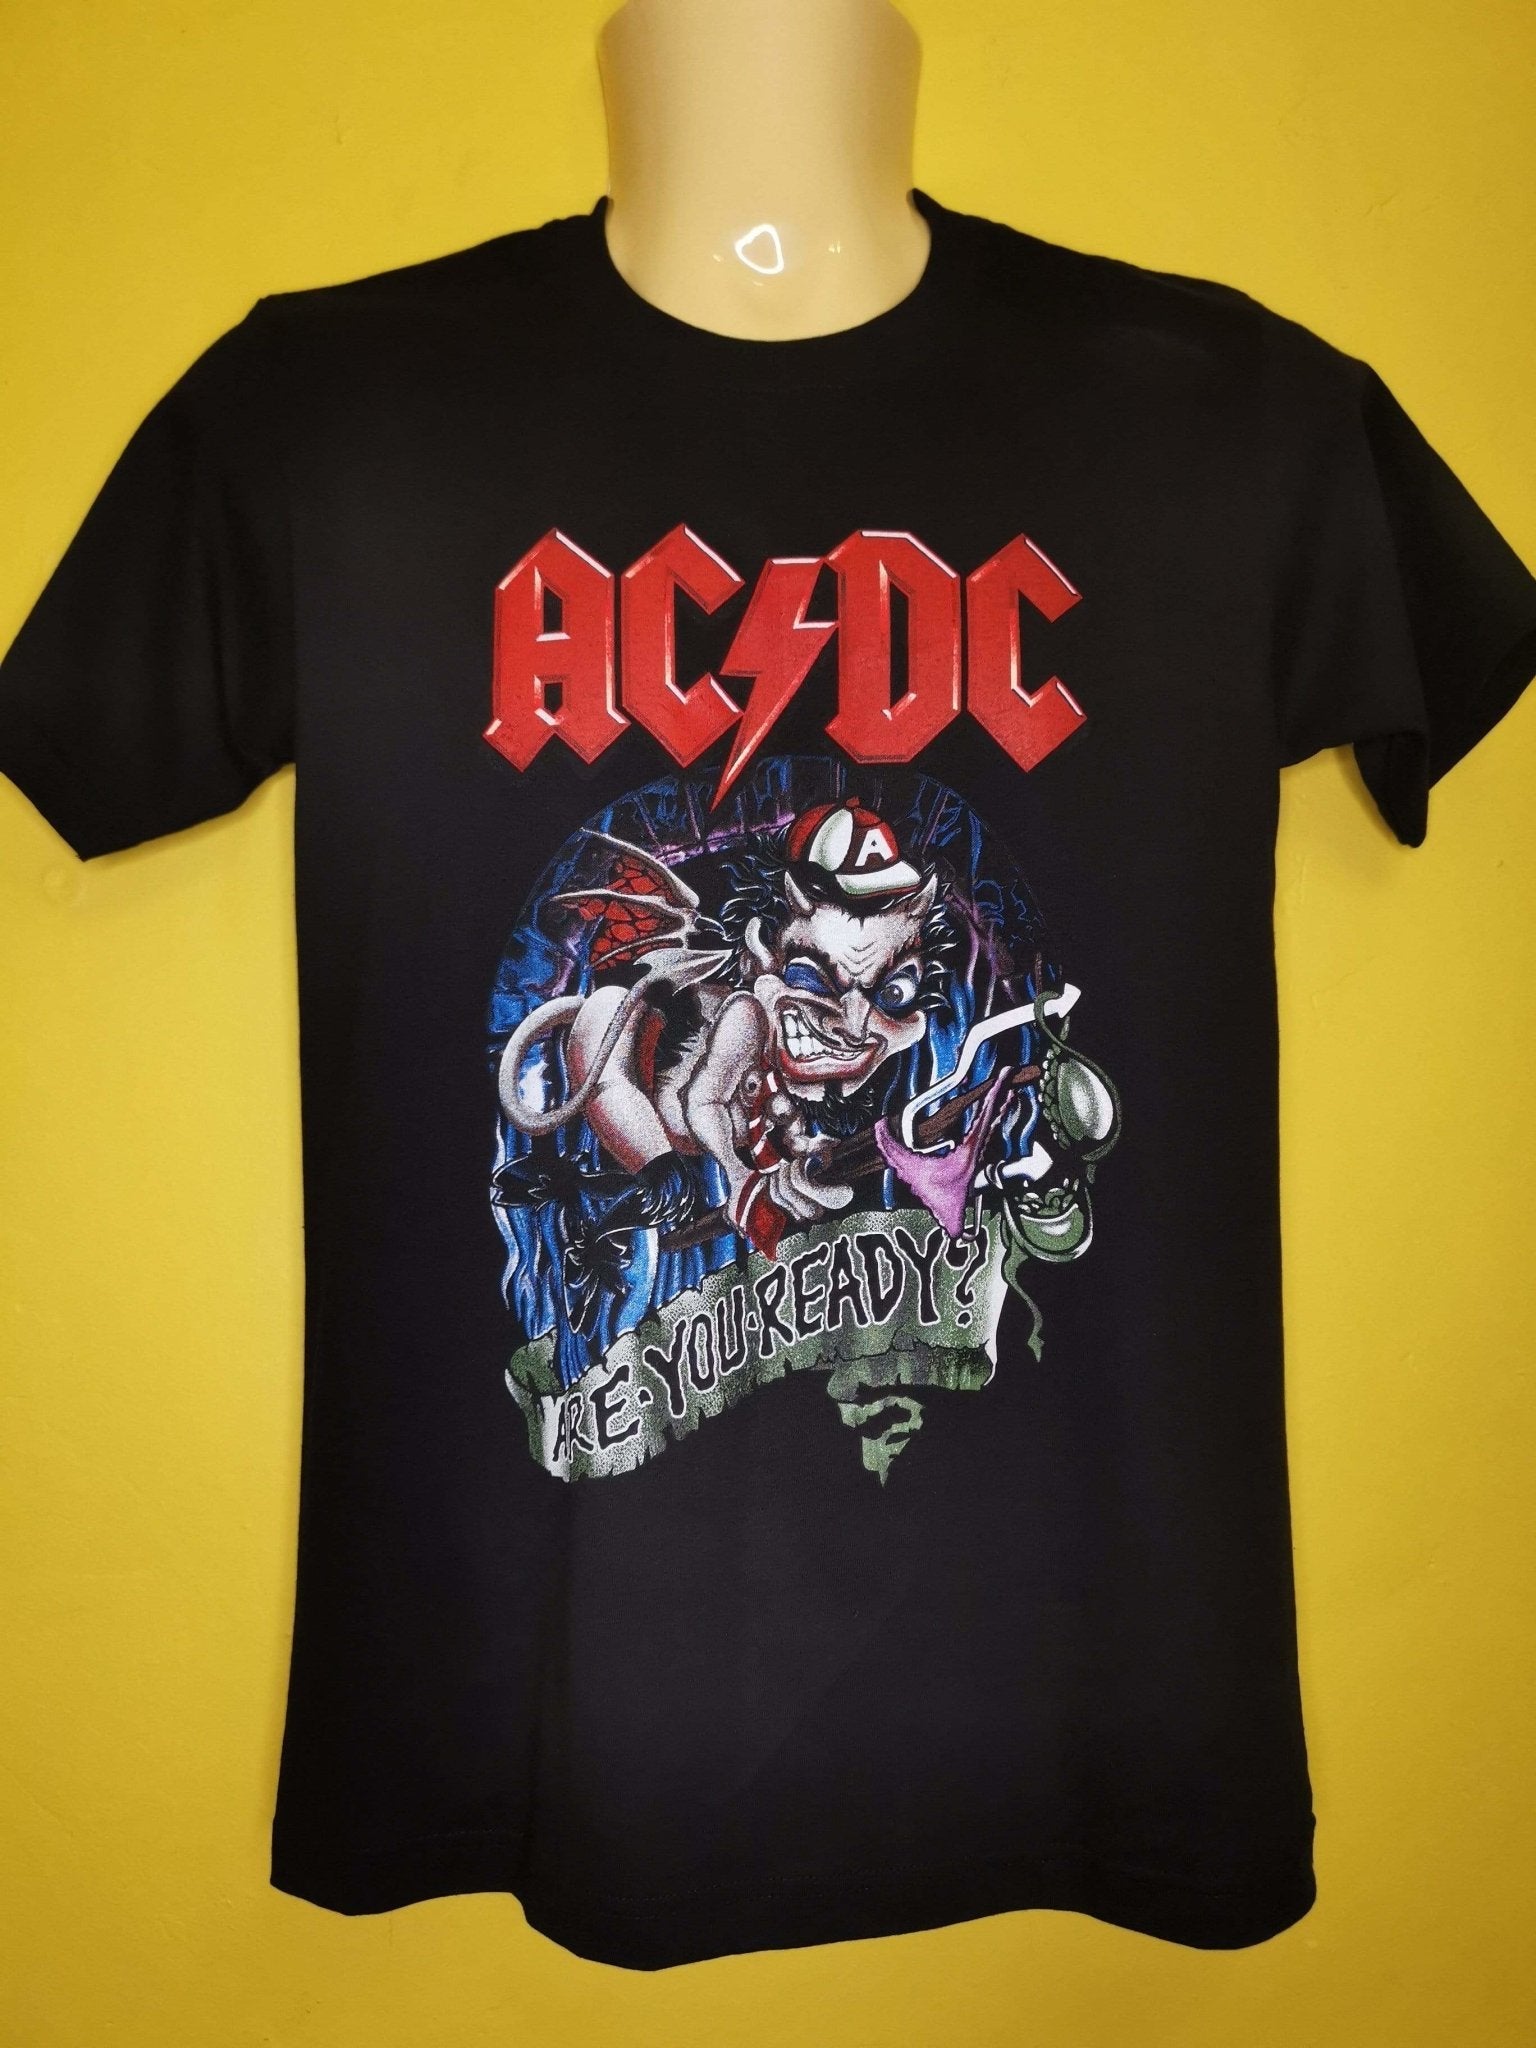 ACDC T-shirt